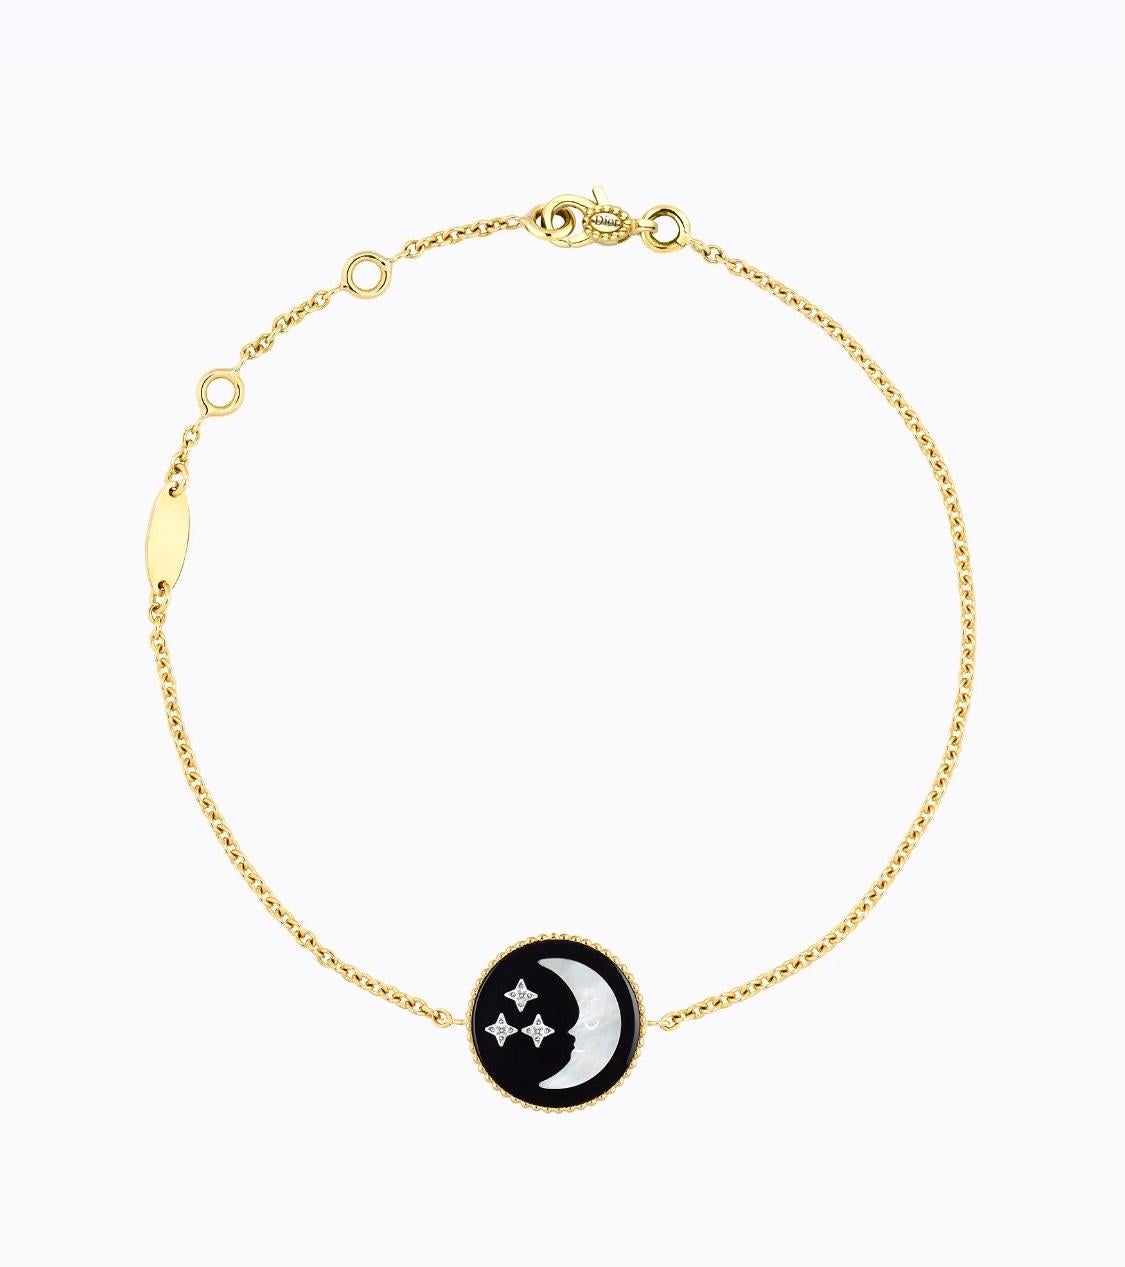 Dior Rose des vents ��“Rose Céleste” bracelet in 18 carats yellow gold, composed of a reversible mother-of-pearl and onyx disc, the sun with a diamond on one side and the moon on the other side. All held by a fine yellow gold chain.

Length adjustable